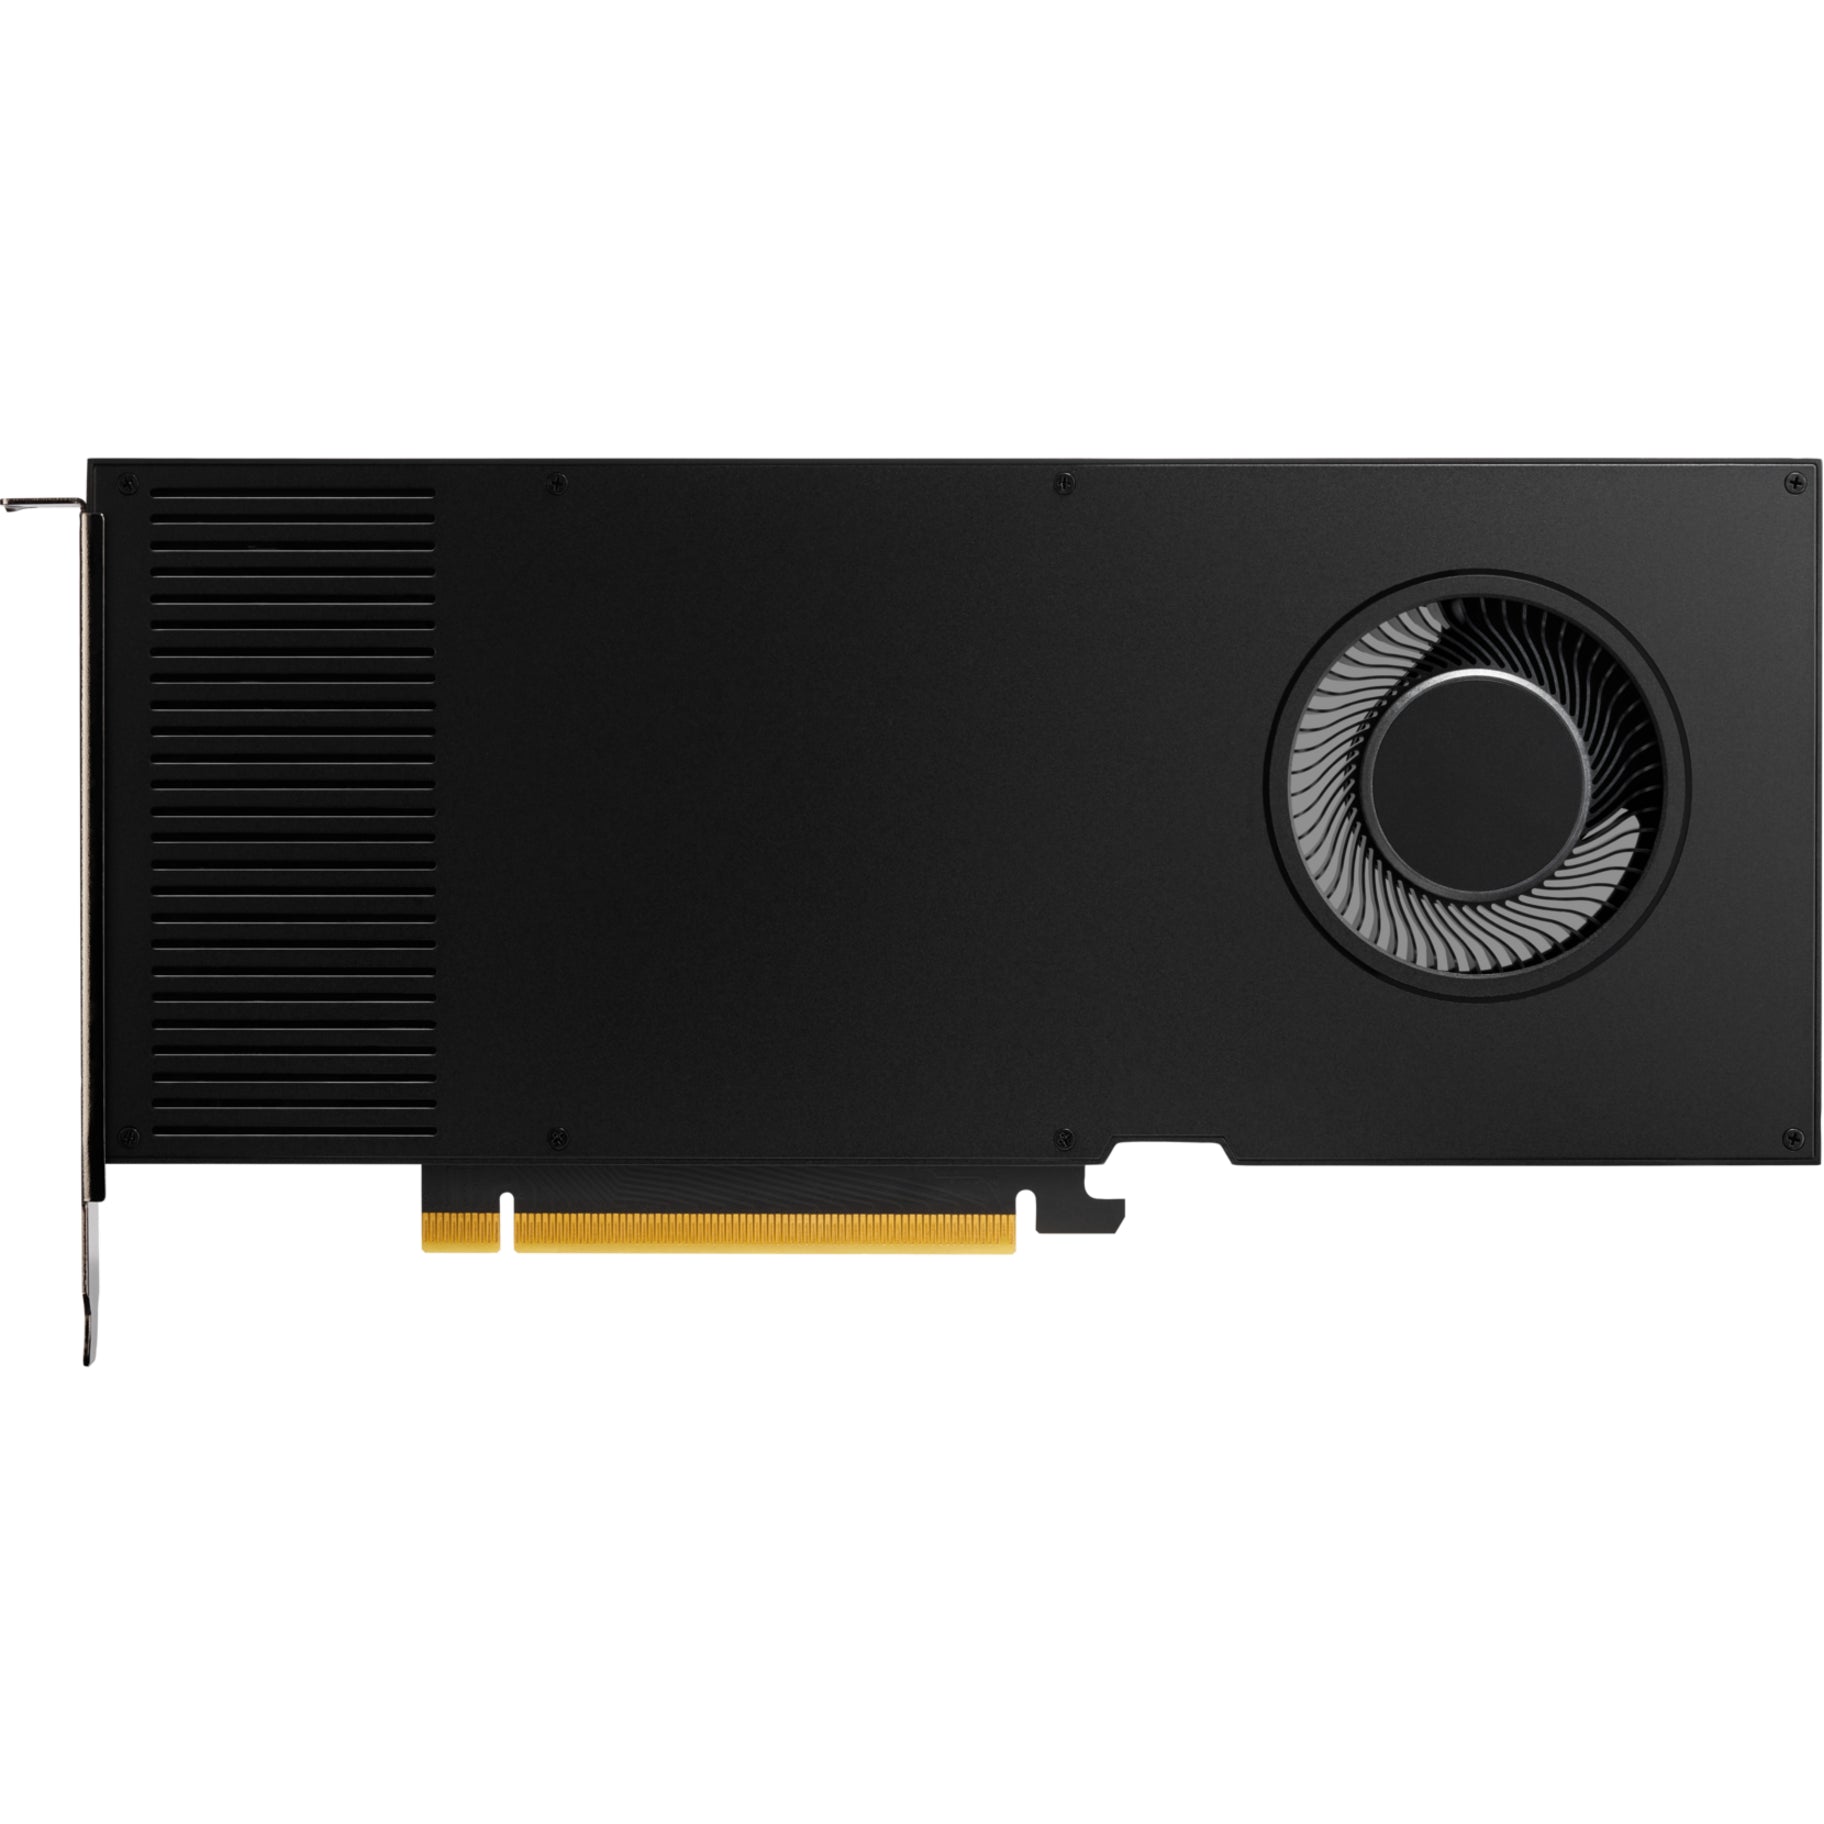 HP 20X24AT RTX A4000 Graphic Card - 16 GB - DisplayPort, Powerful Graphics for PC Gaming and Design